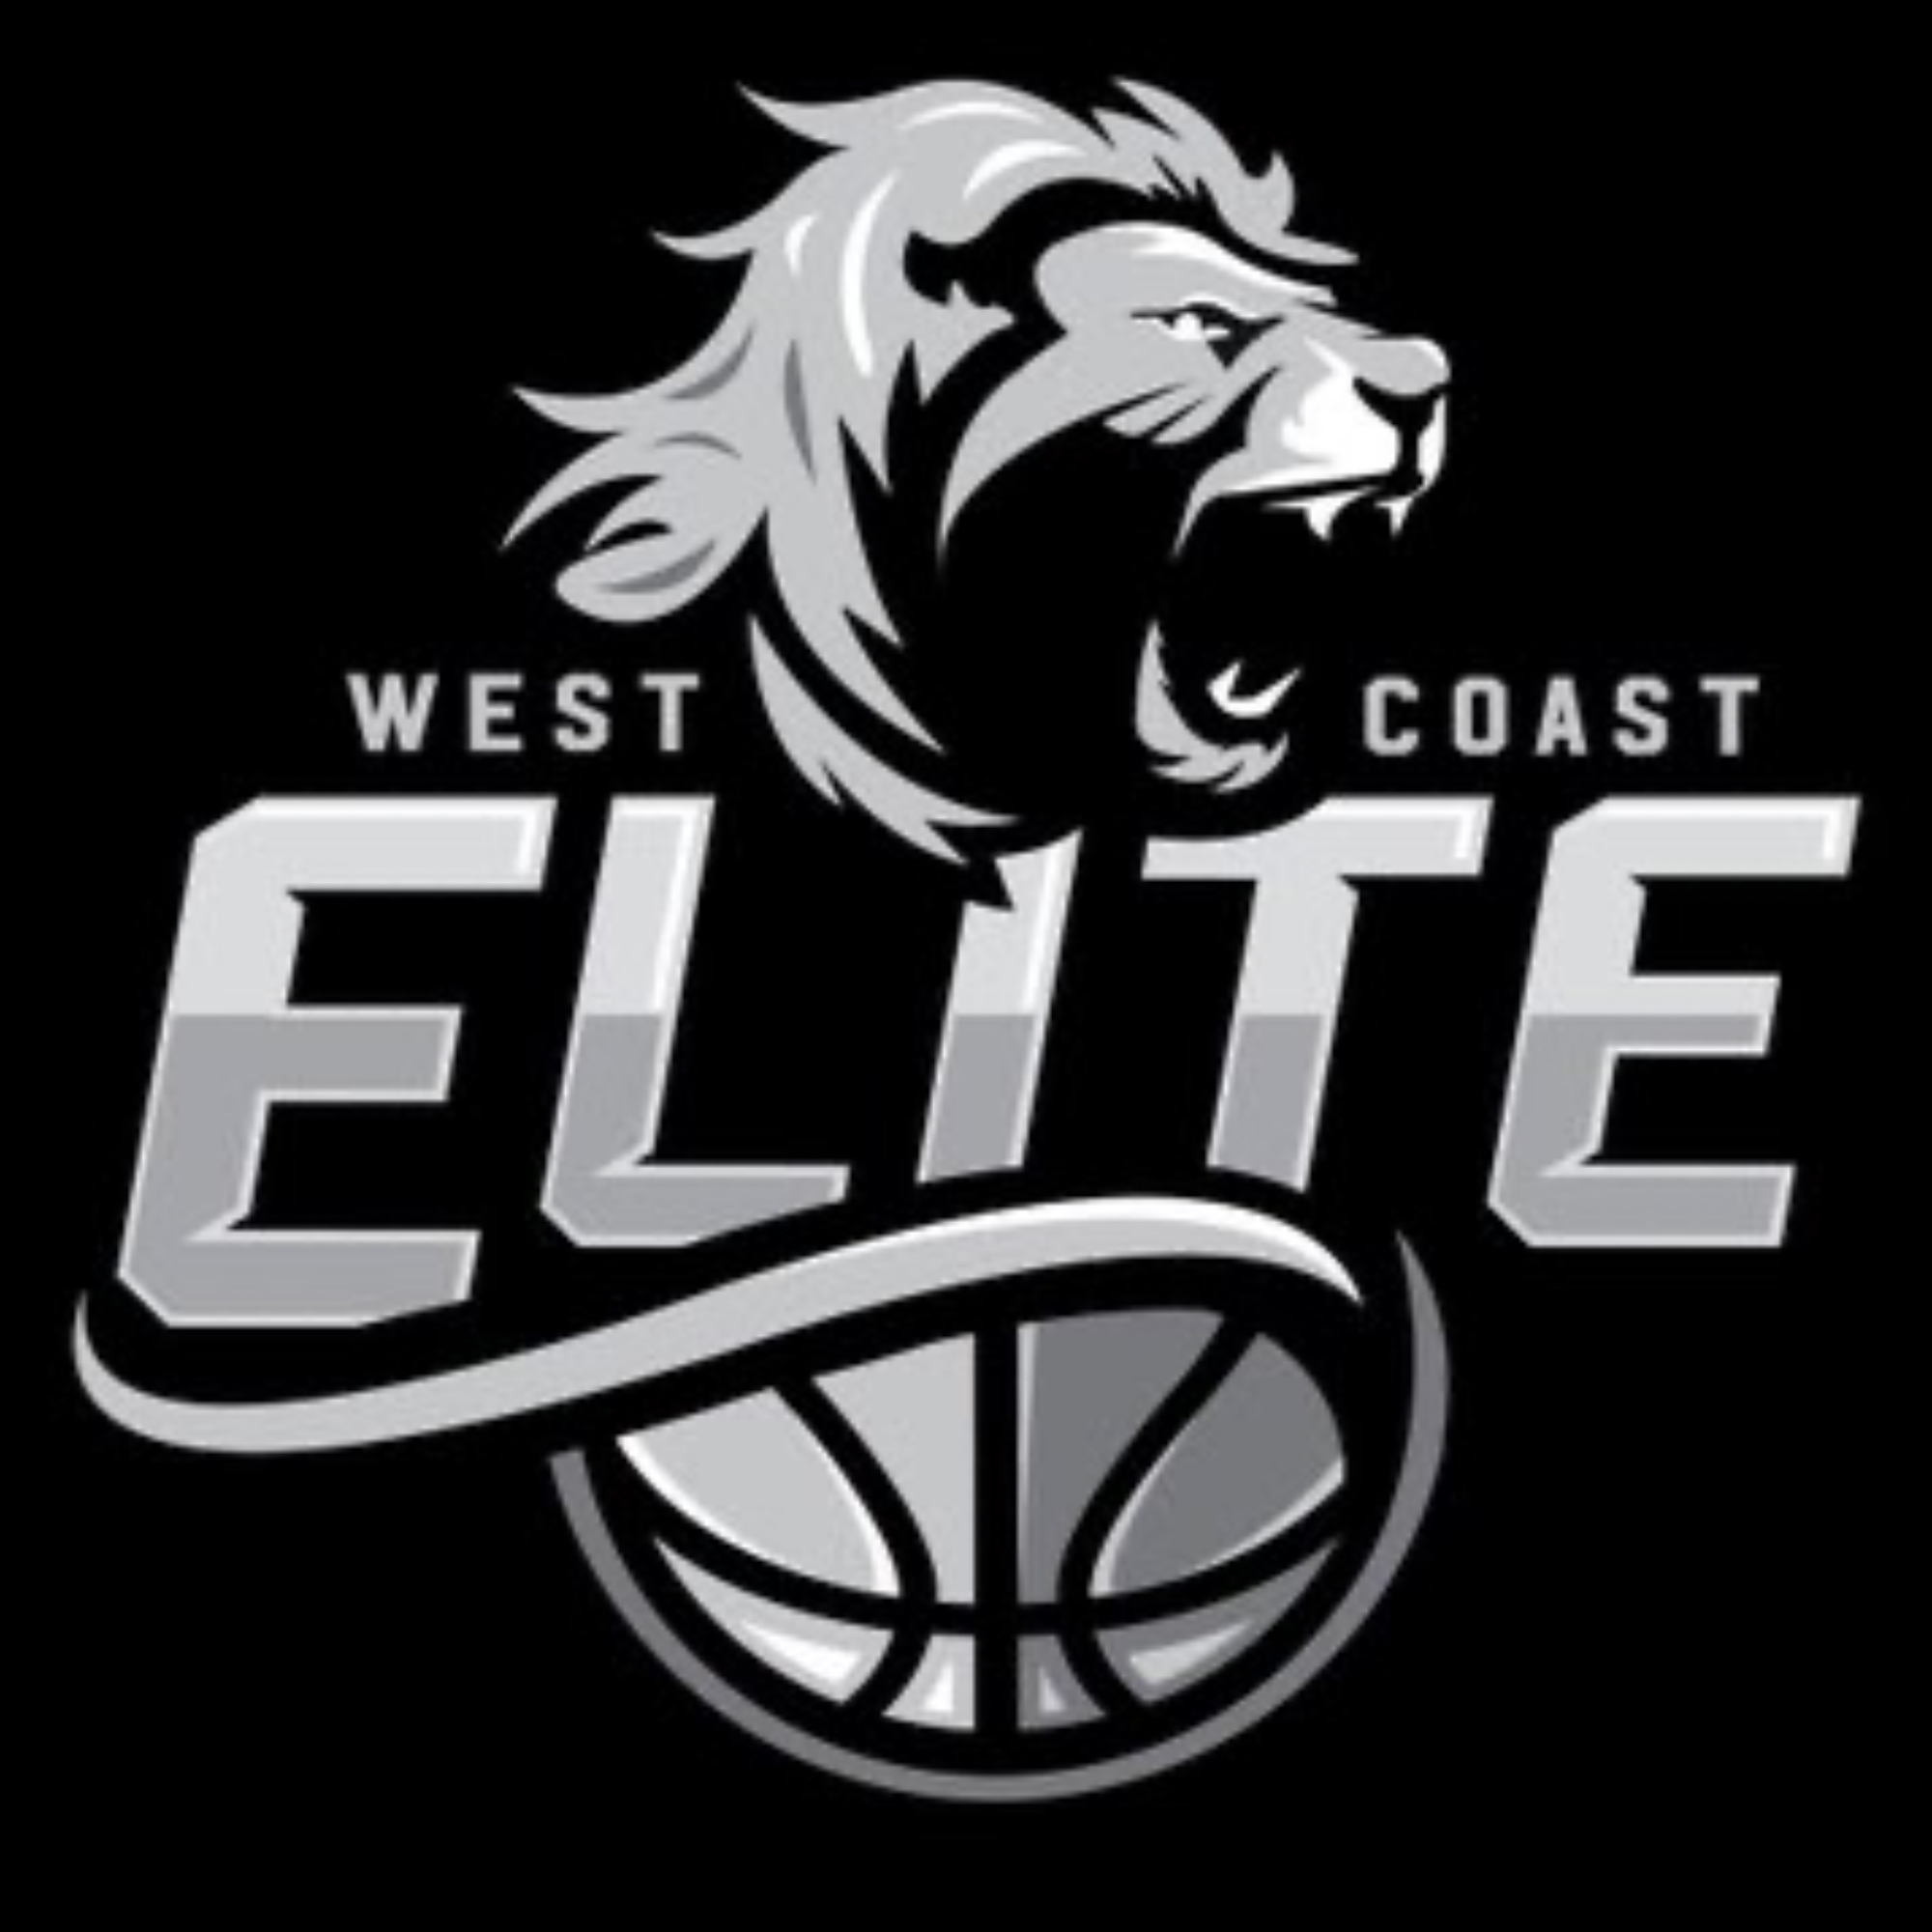 The official logo of West Coast Elite NorCal